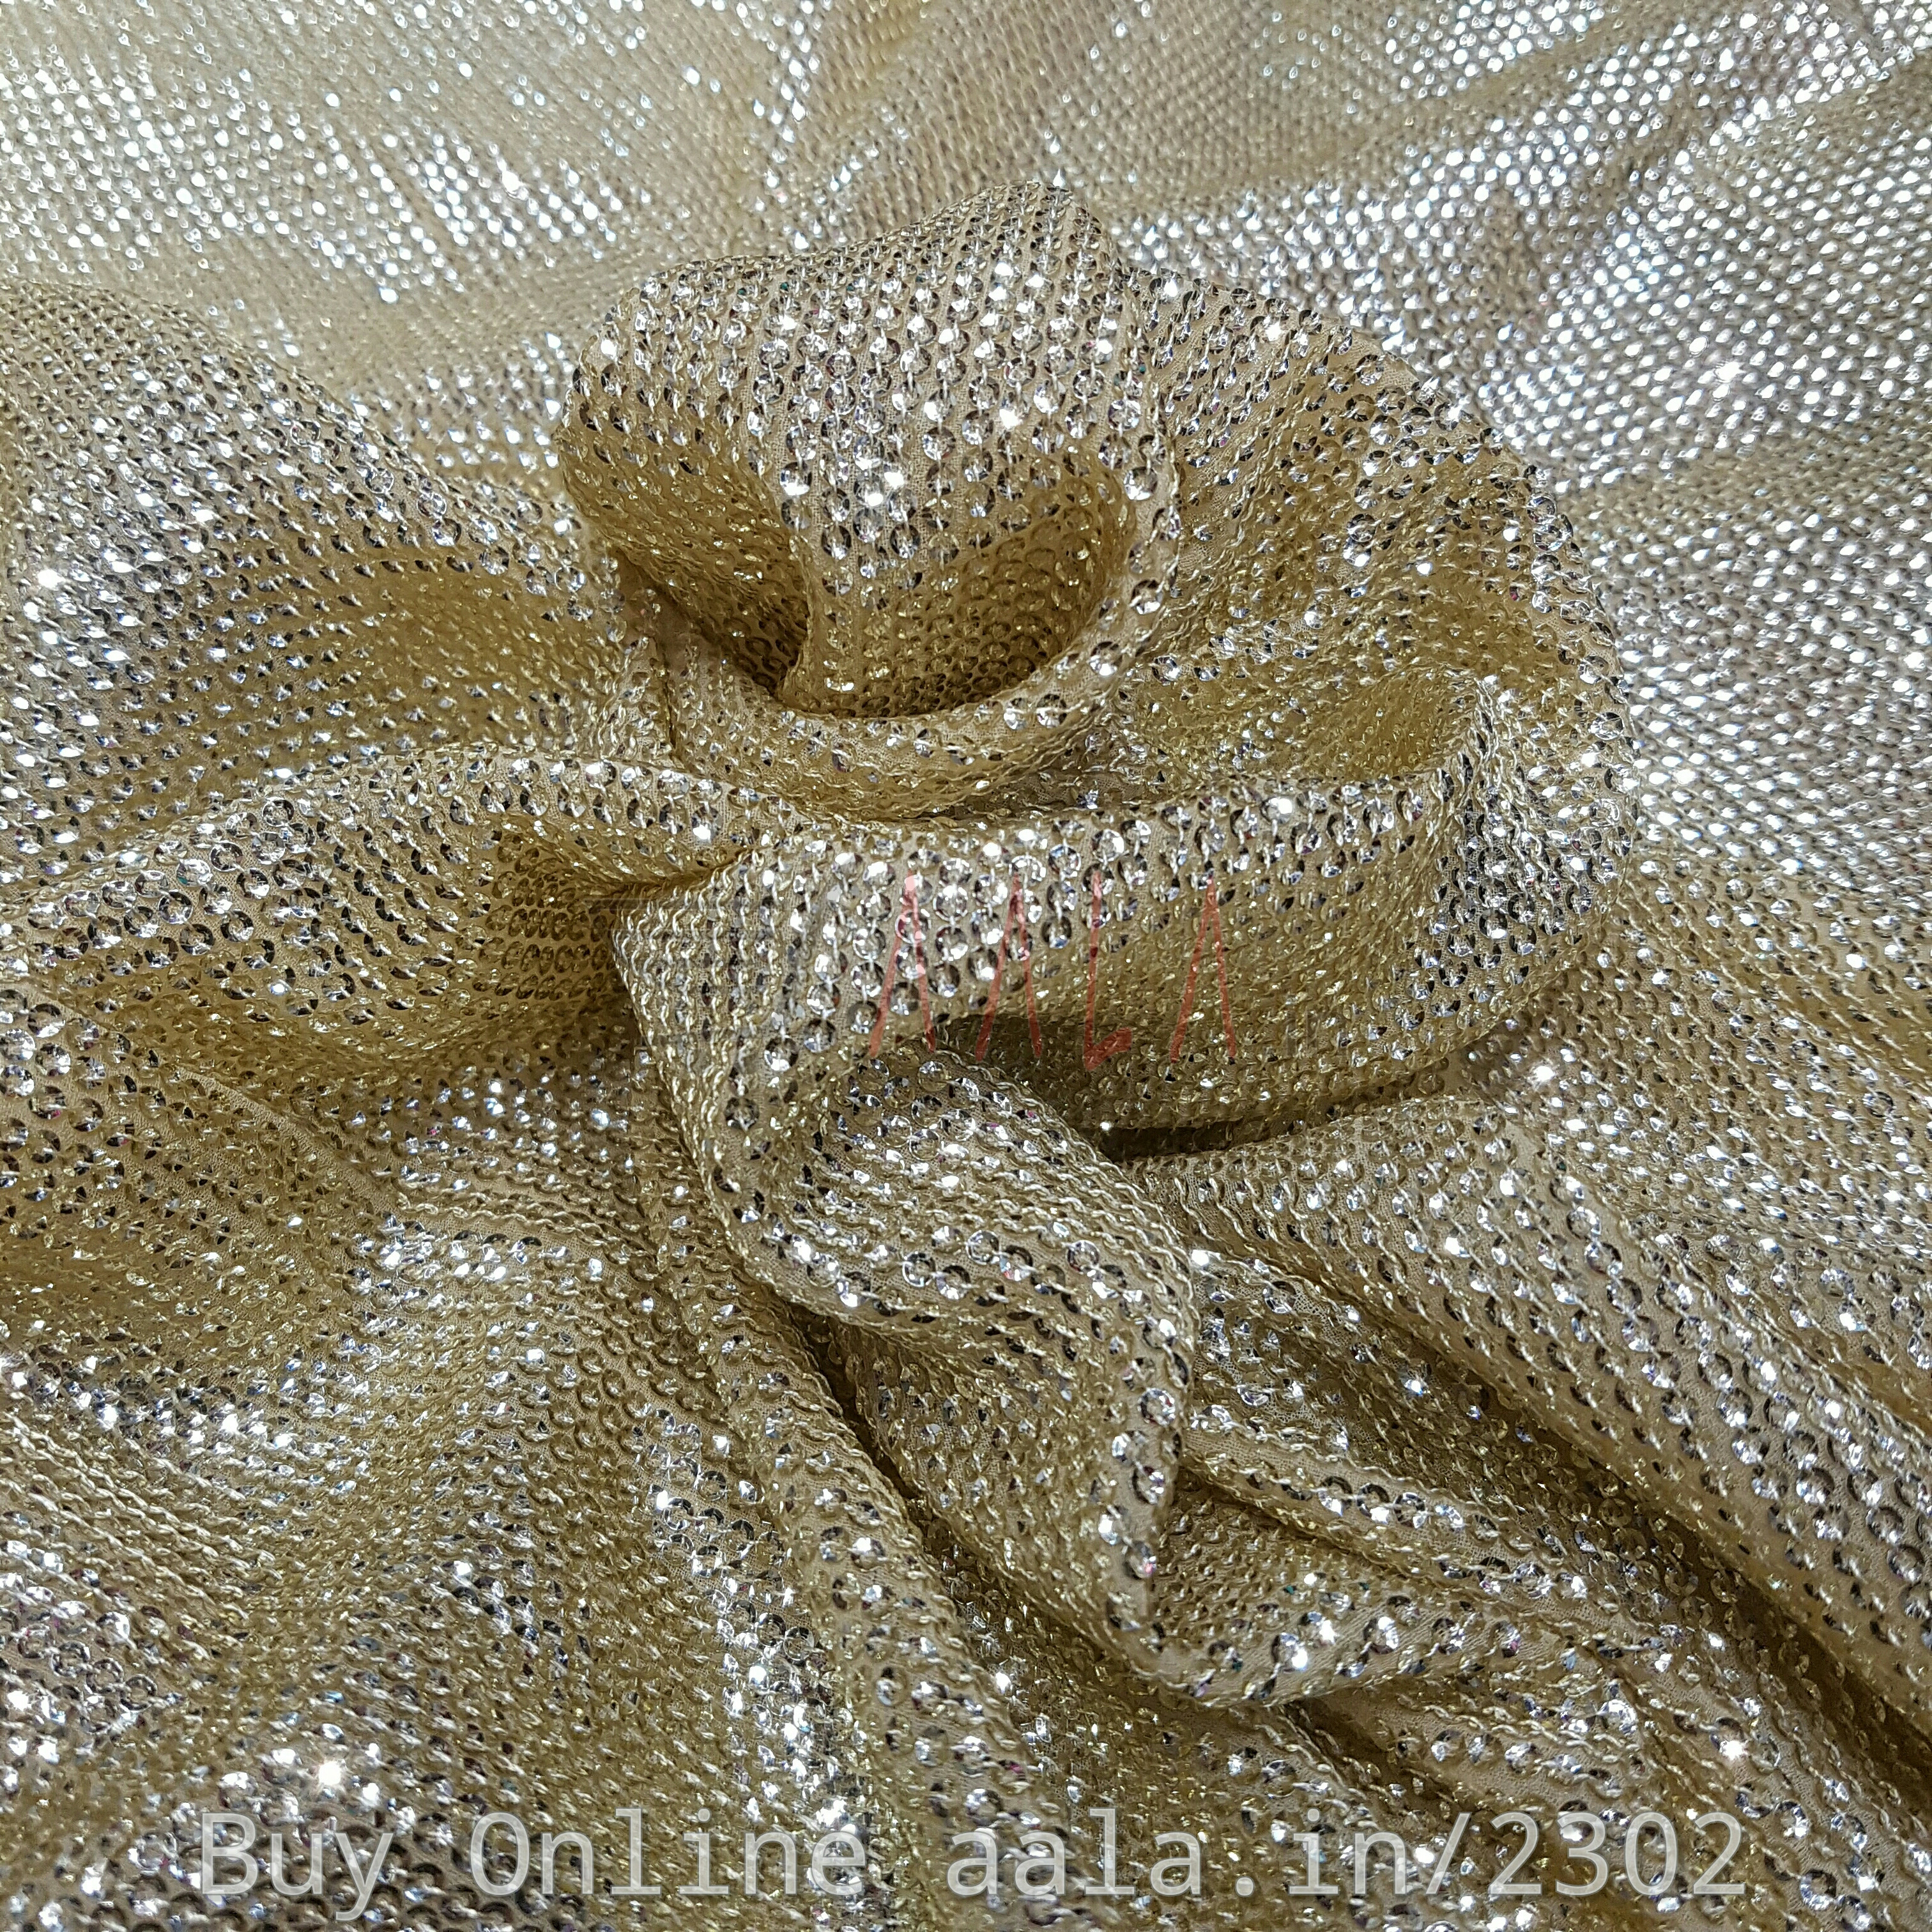 Katori Sequins Georgette Viscose 44 Inches Dyed Per Metre #2302